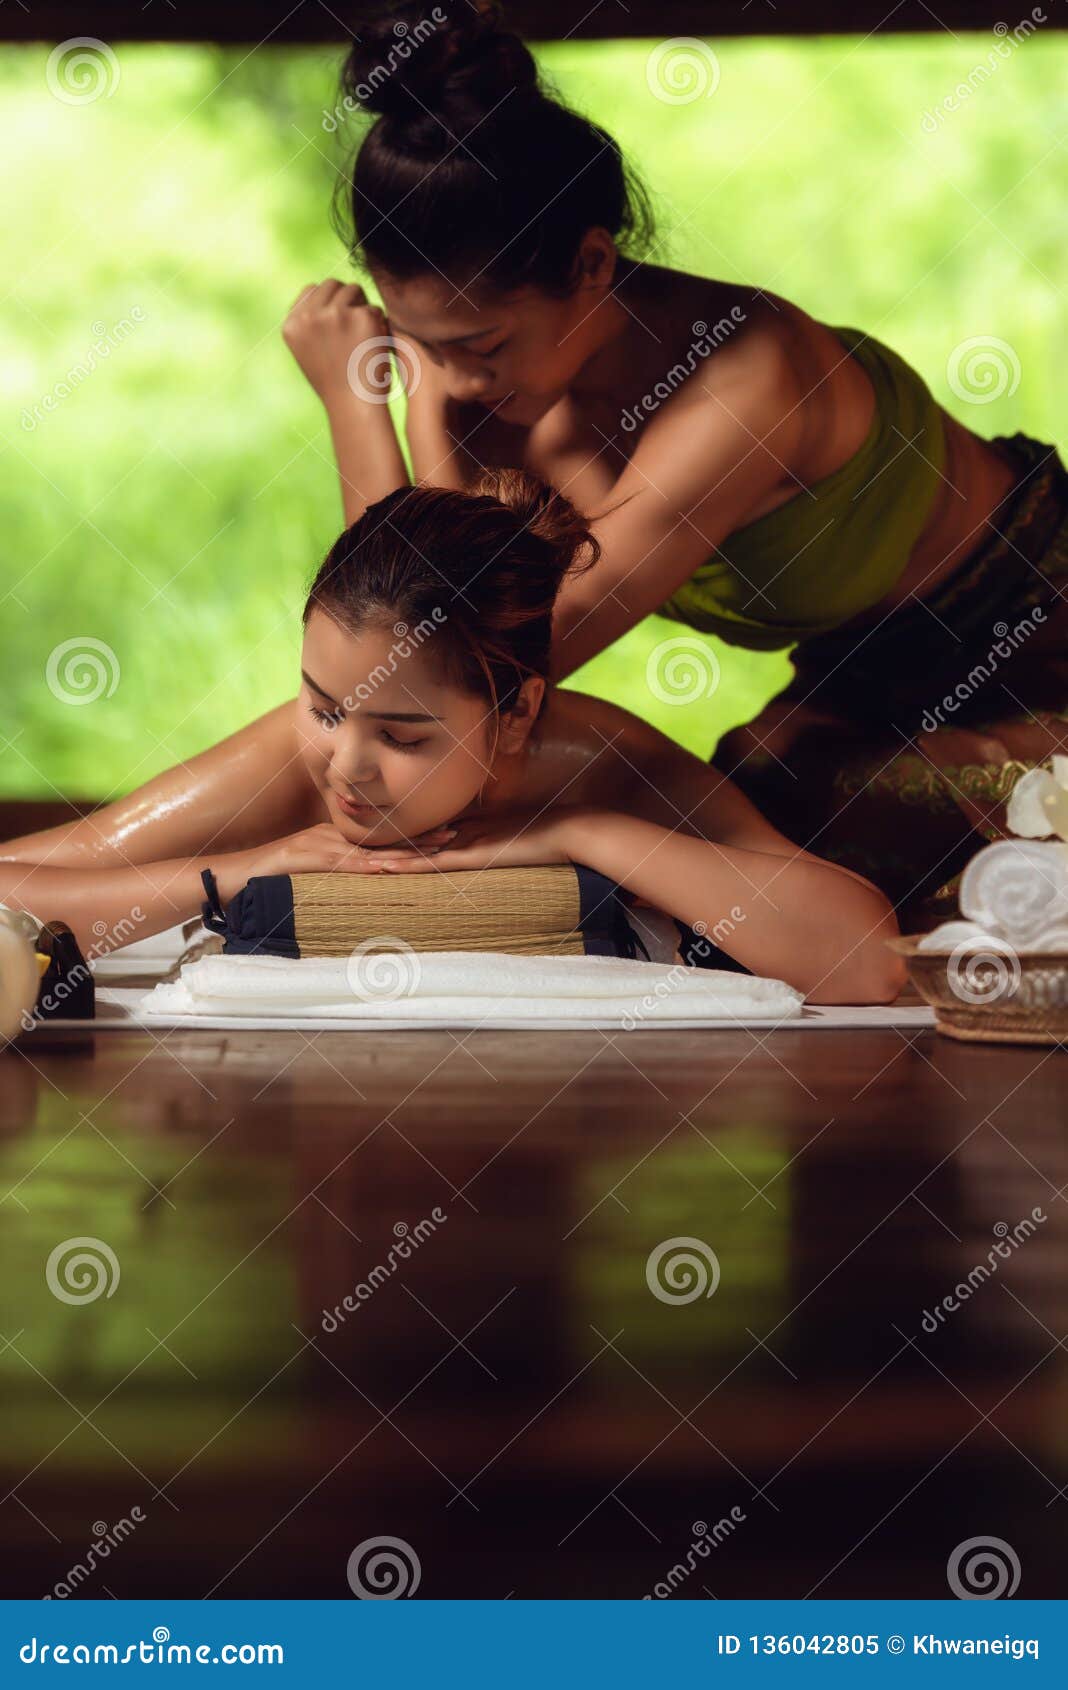 Thai Girls Therapist Body Spa Massage and Lying Relaxation in Business Massaging and Salon Shop., Pretty Attractive Asian Woman is Stock Image photo pic